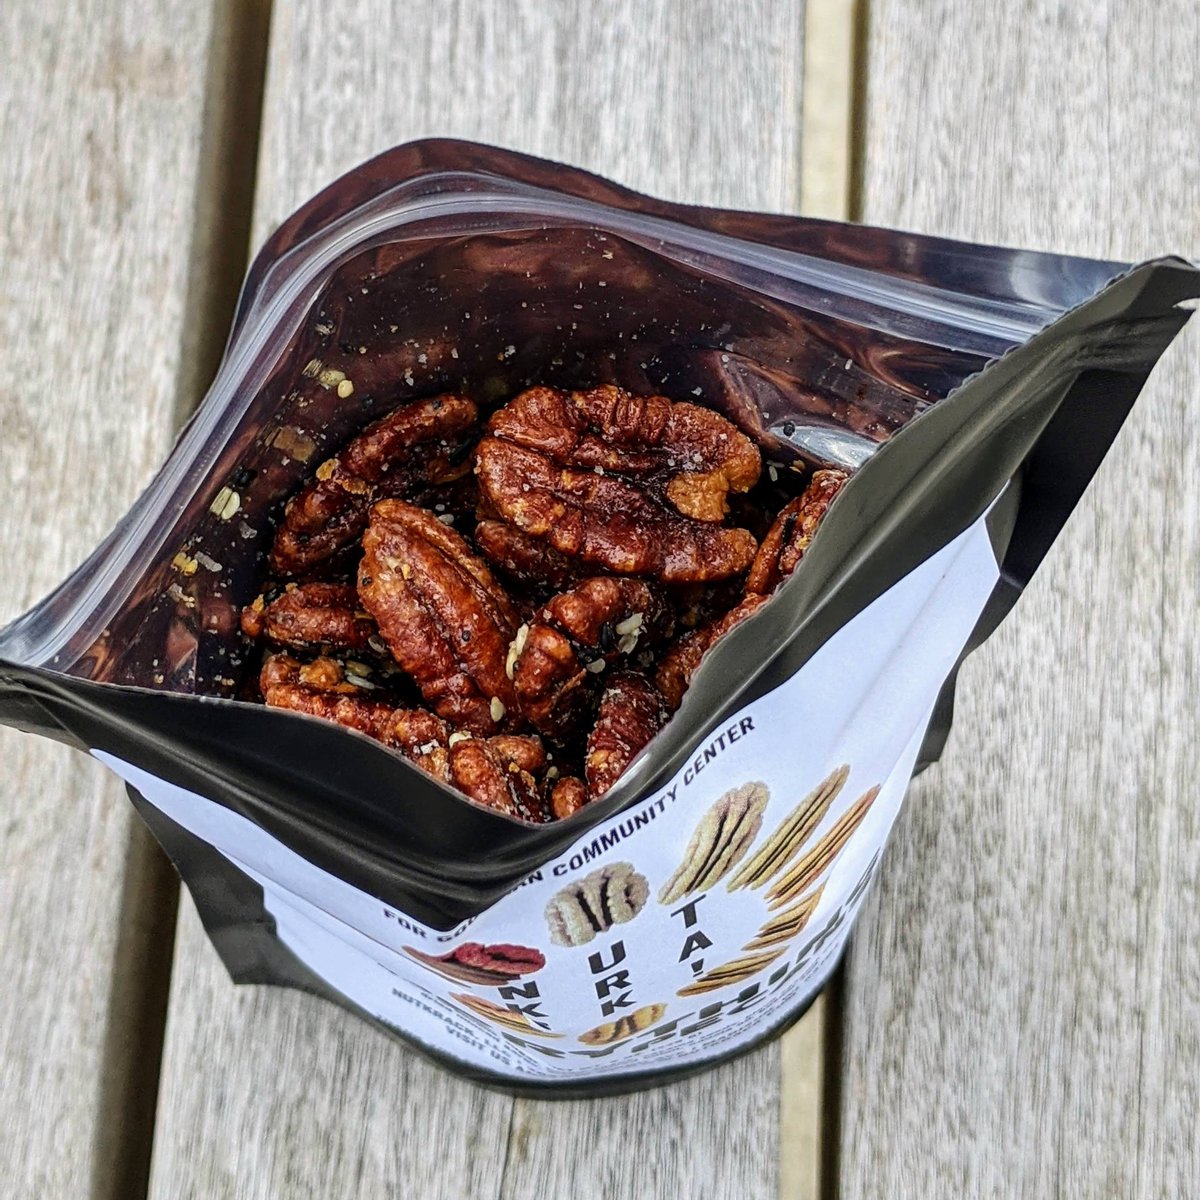 𝑪𝒂𝒏 𝒄𝒐𝒏𝒇𝒊𝒓𝒎: the #everythingpecans from @NutKrackMadison are as good as they sound. Think everything bagel meets candied pecan. Even better, $8 from every bag of this limited flavor sold benefits GCC! Order at buff.ly/2Yq51ba.